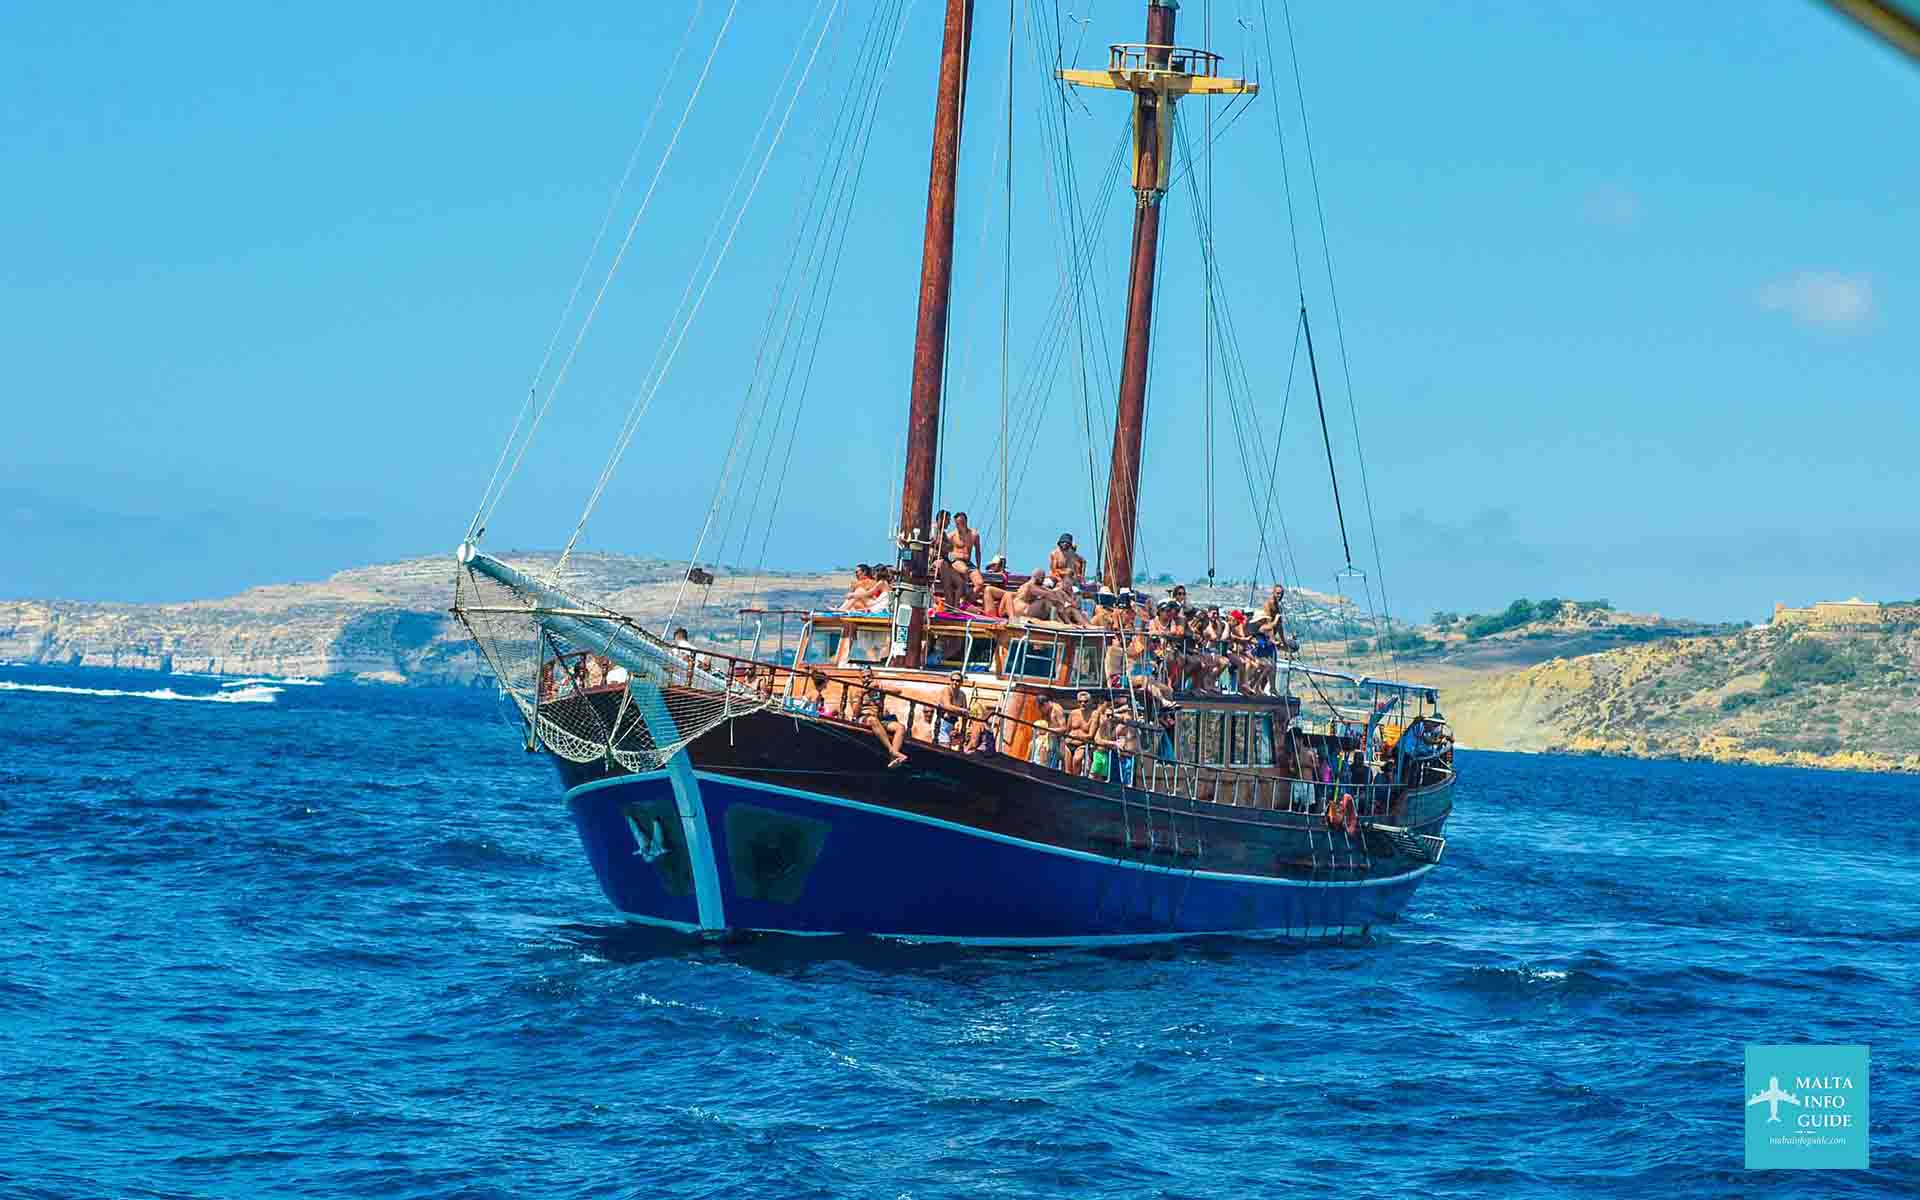 The Fernandes boat on its way to Comino. This is a Captain Morgan Cruises.